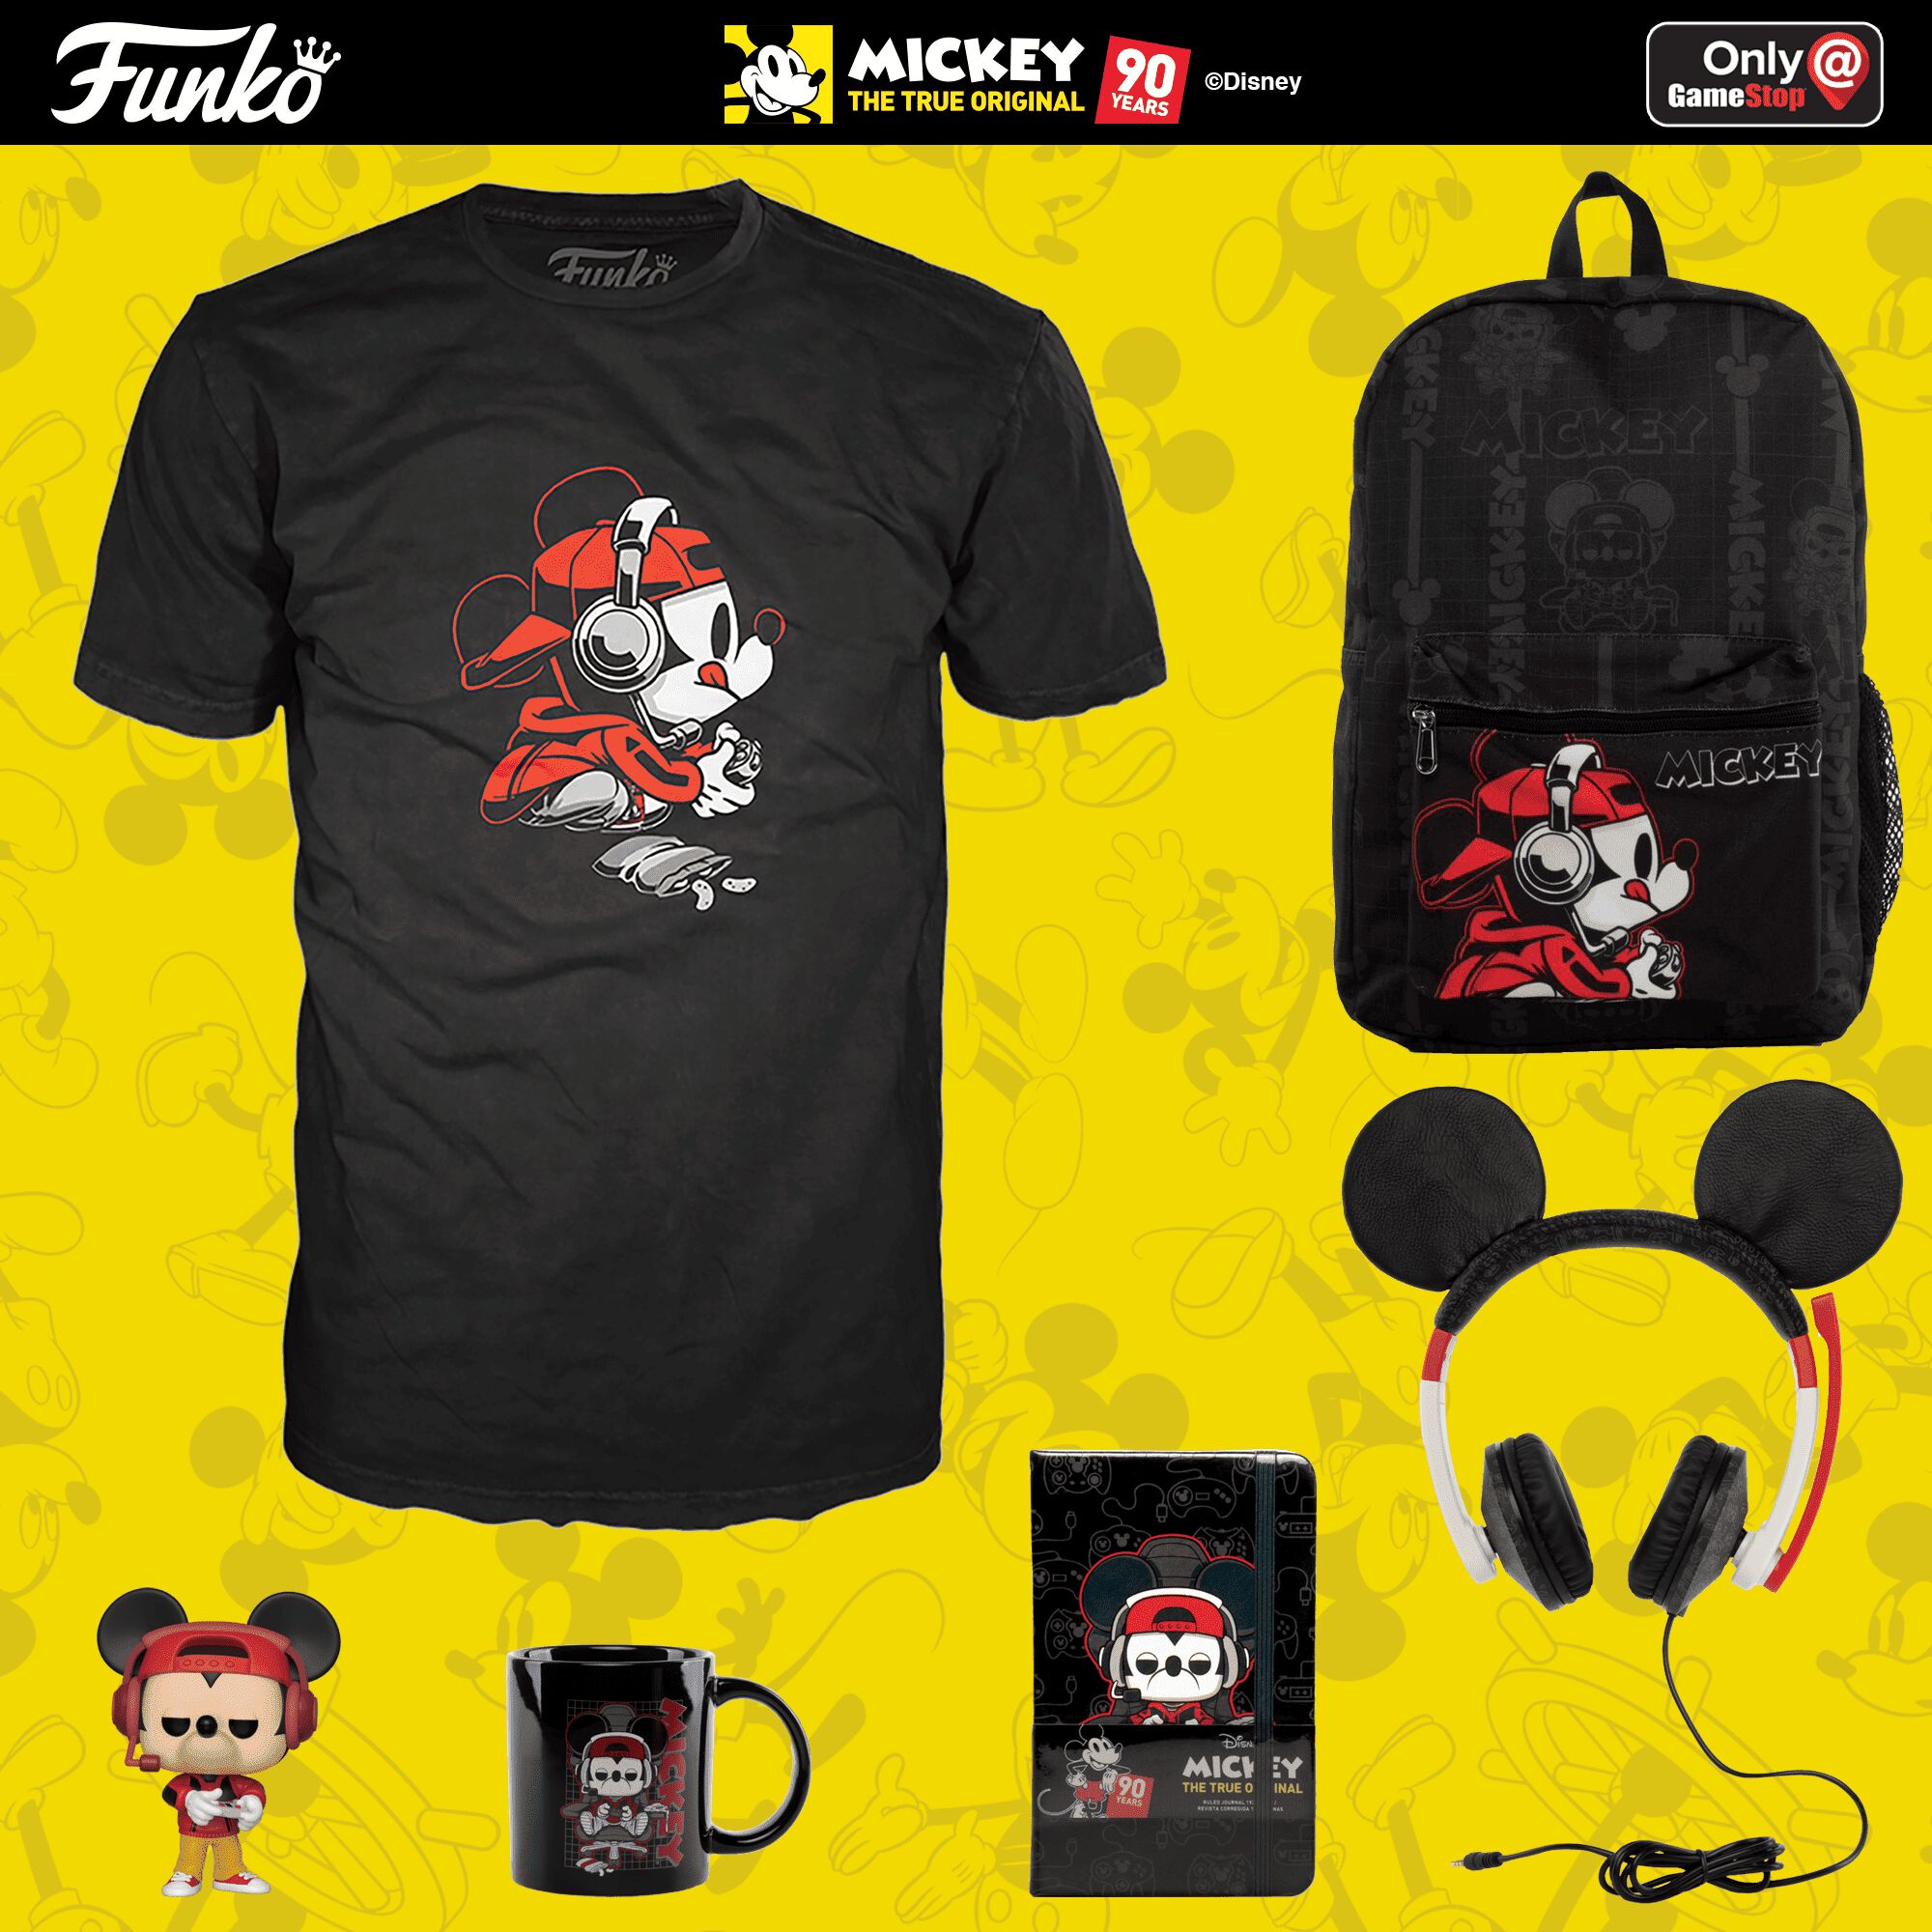 Available Now: GameStop exclusive Gamer Mickey & Minnie!